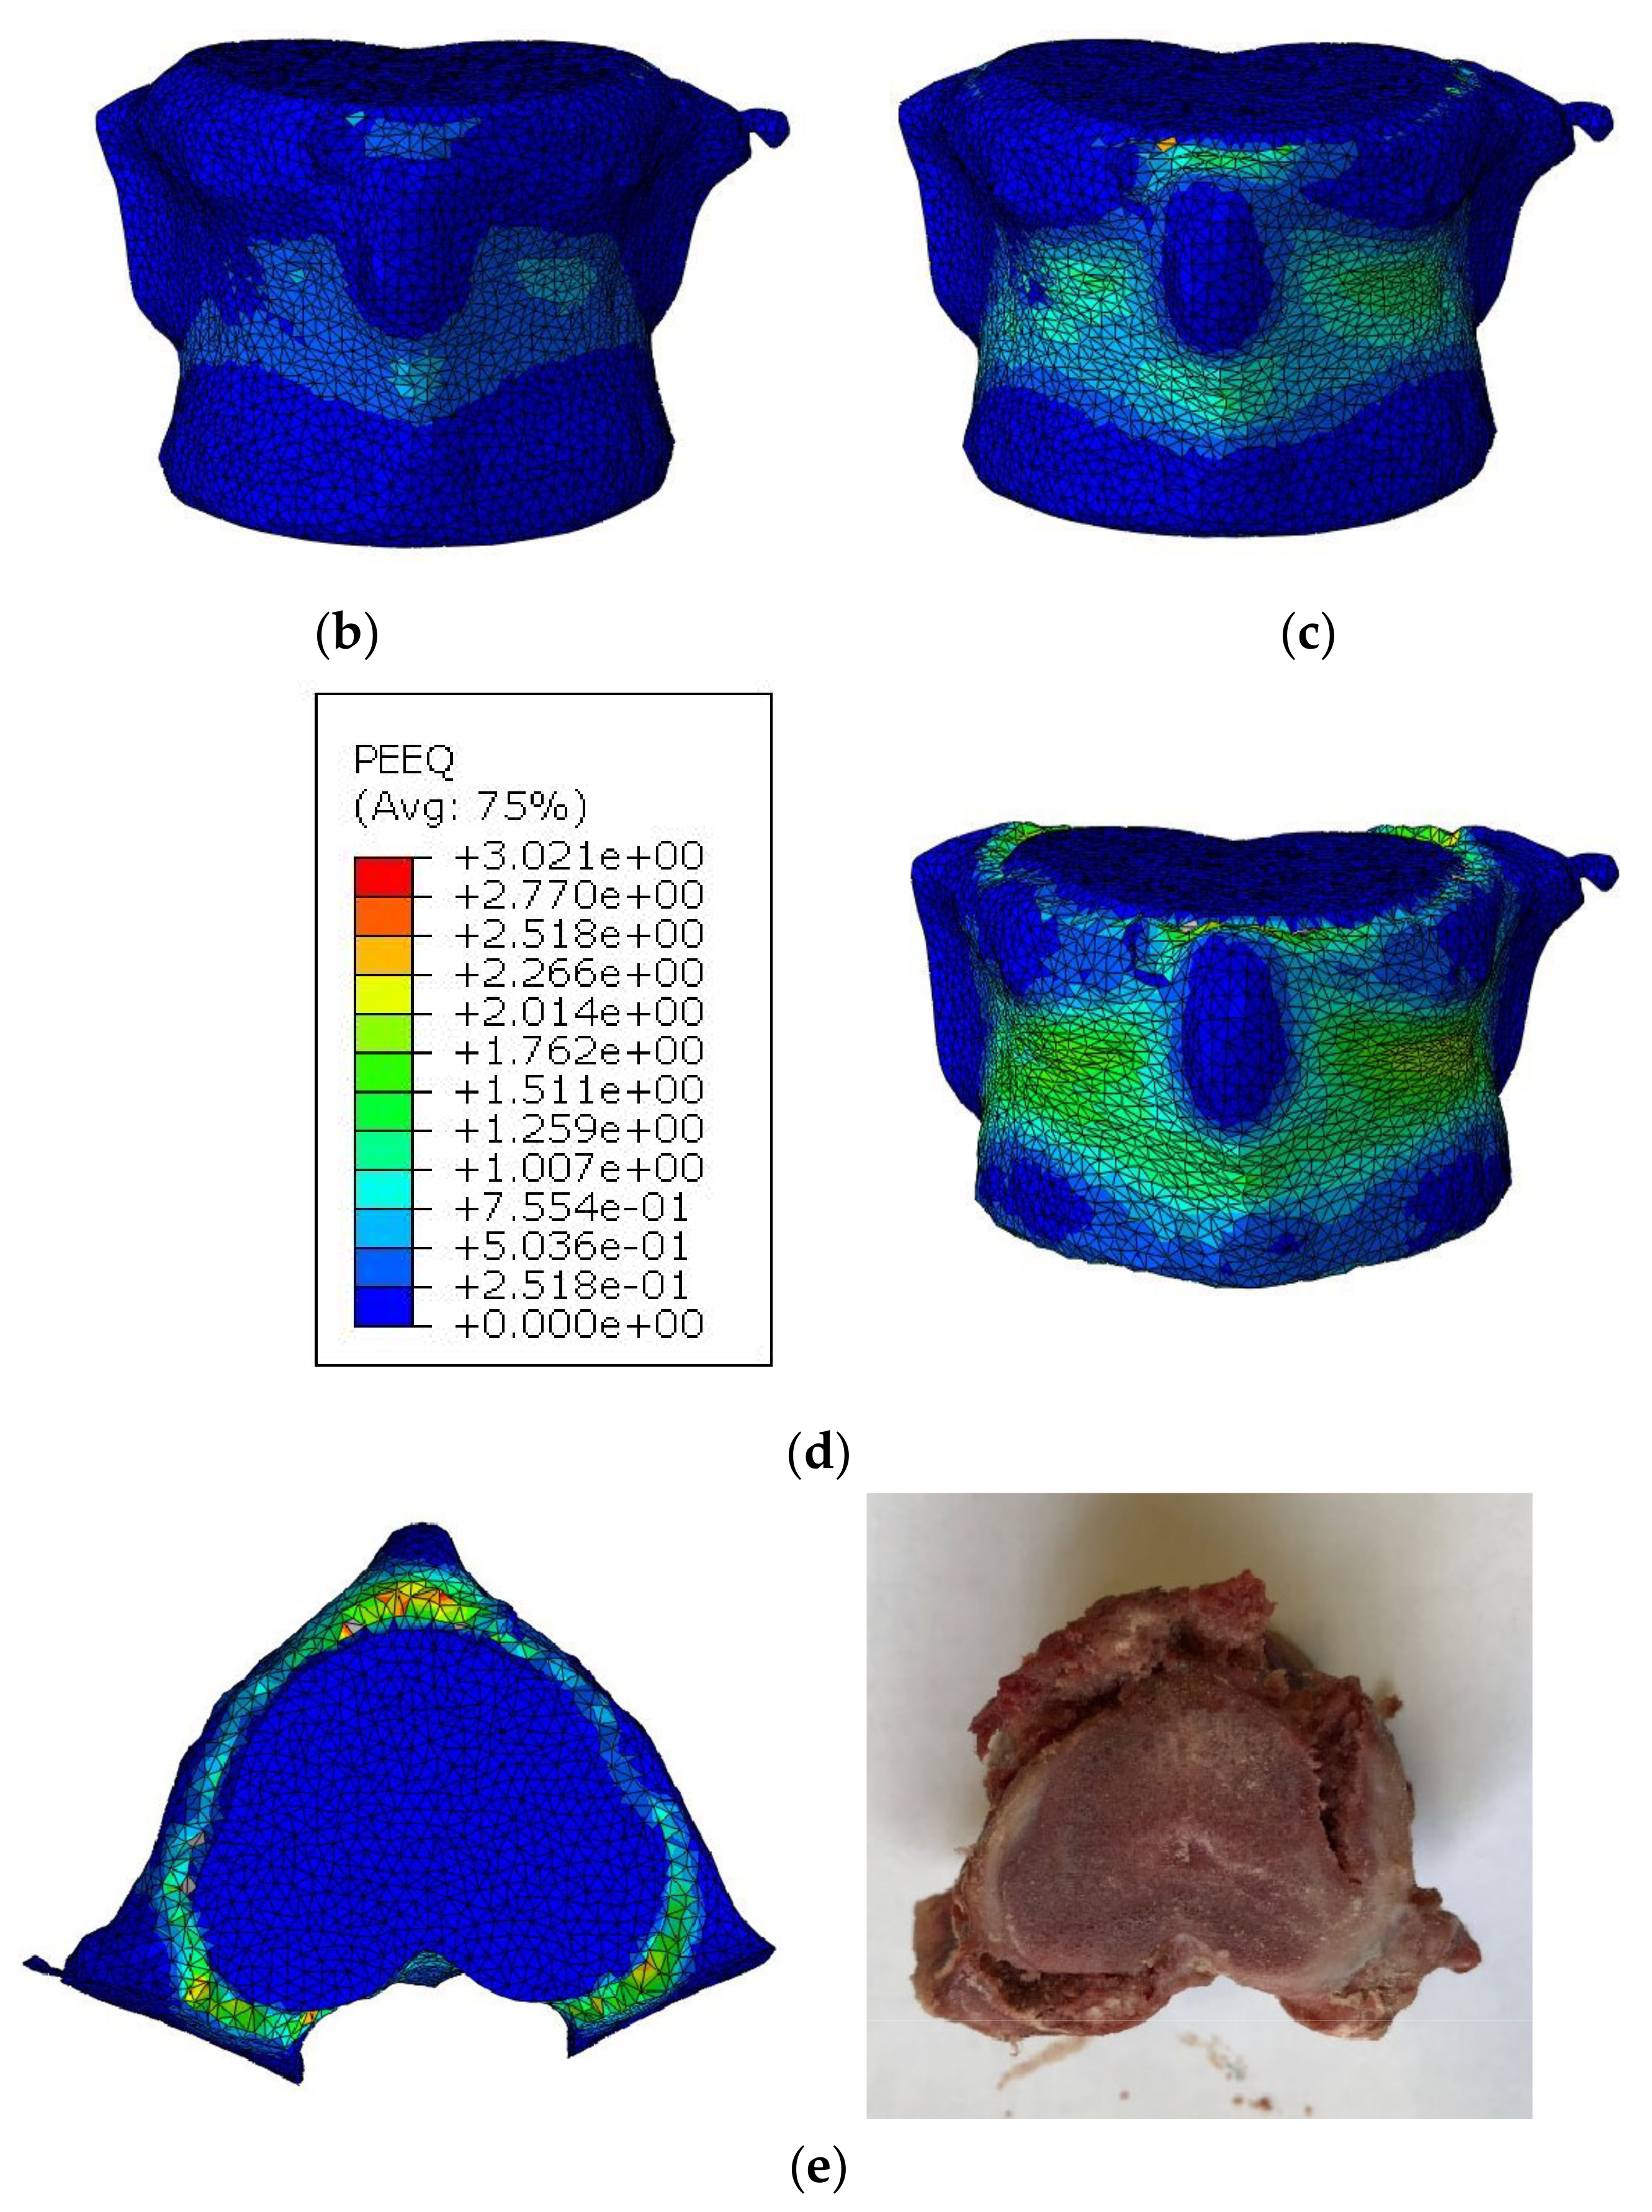 Finite element analysis of compression fractures at the